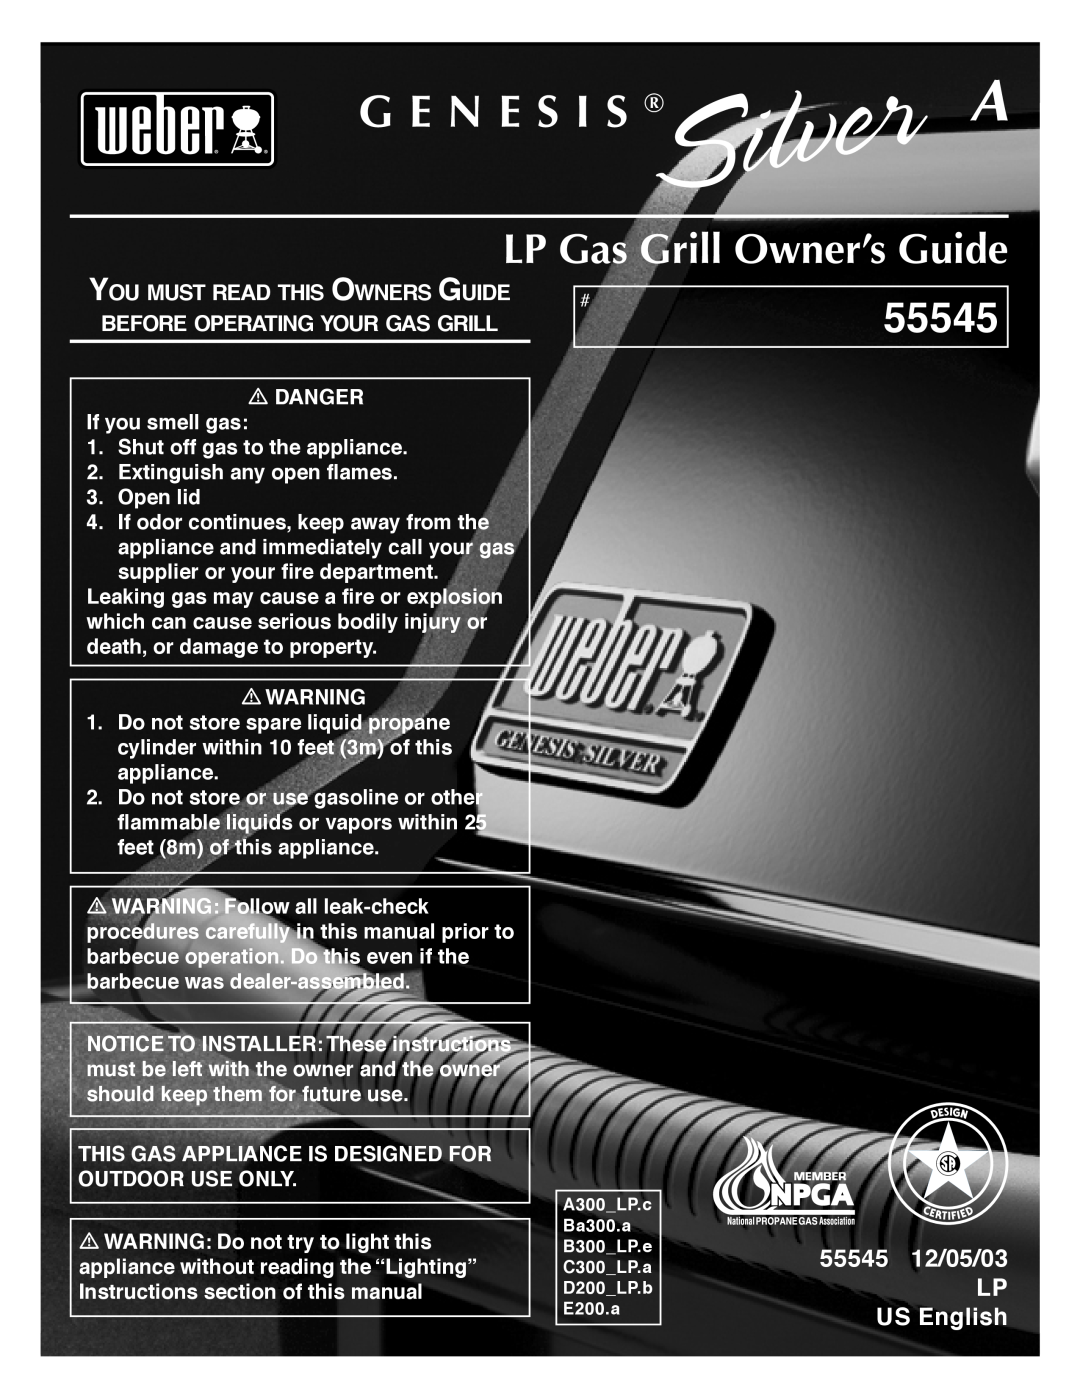 Weber manual LP Gas Grill Owner’s Guide, G E N E S I S, 55545 12/05/03 LP US English 